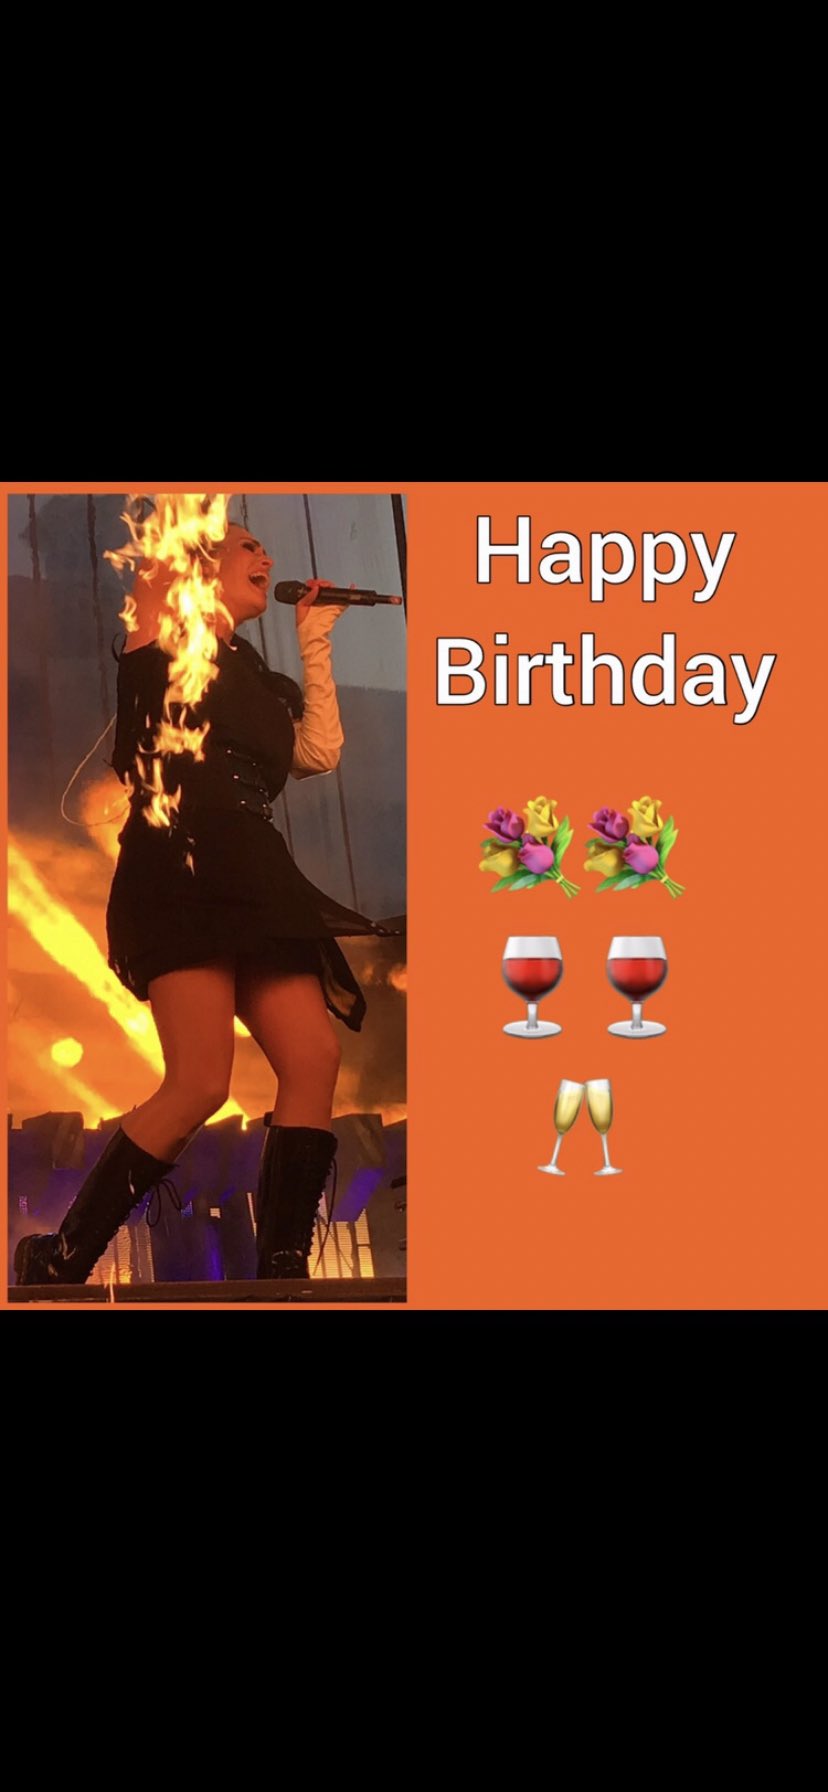 Happy Birthday to the one and only Sharon den Adel        